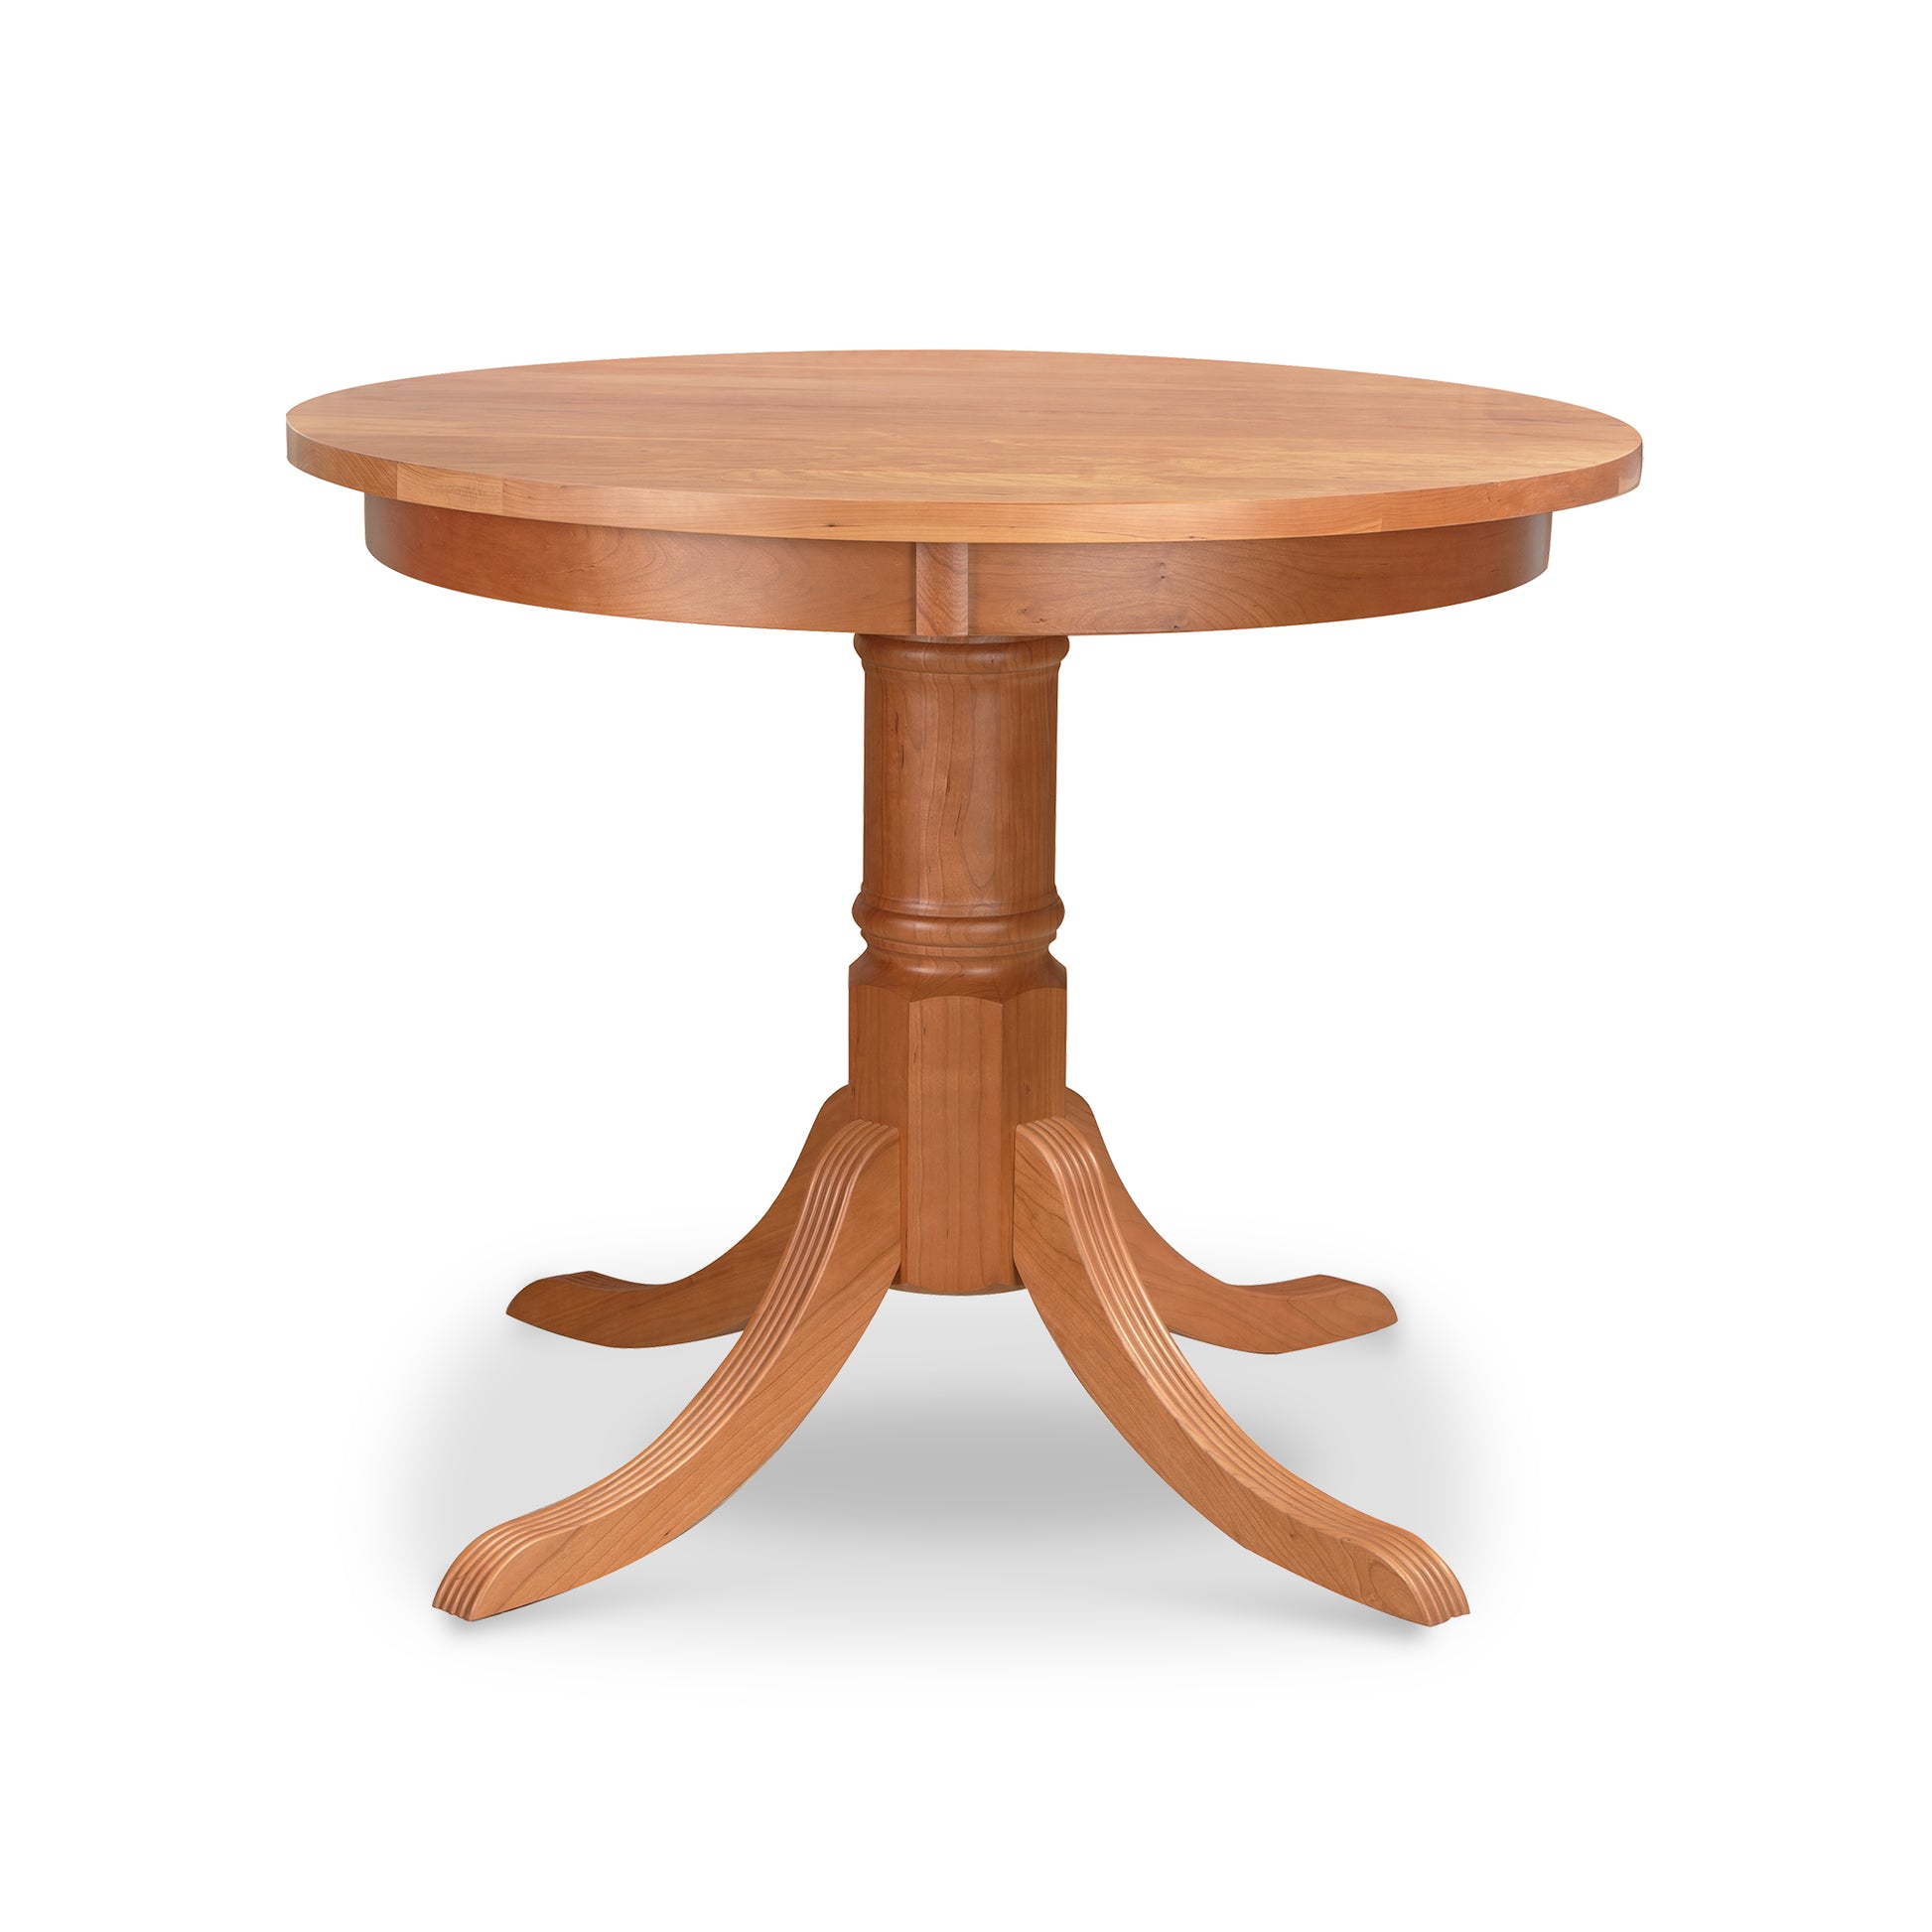 A round Lyndon Furniture Duncan-Phyfe Round Pedestal Dining Table with a wooden base and round solid top.